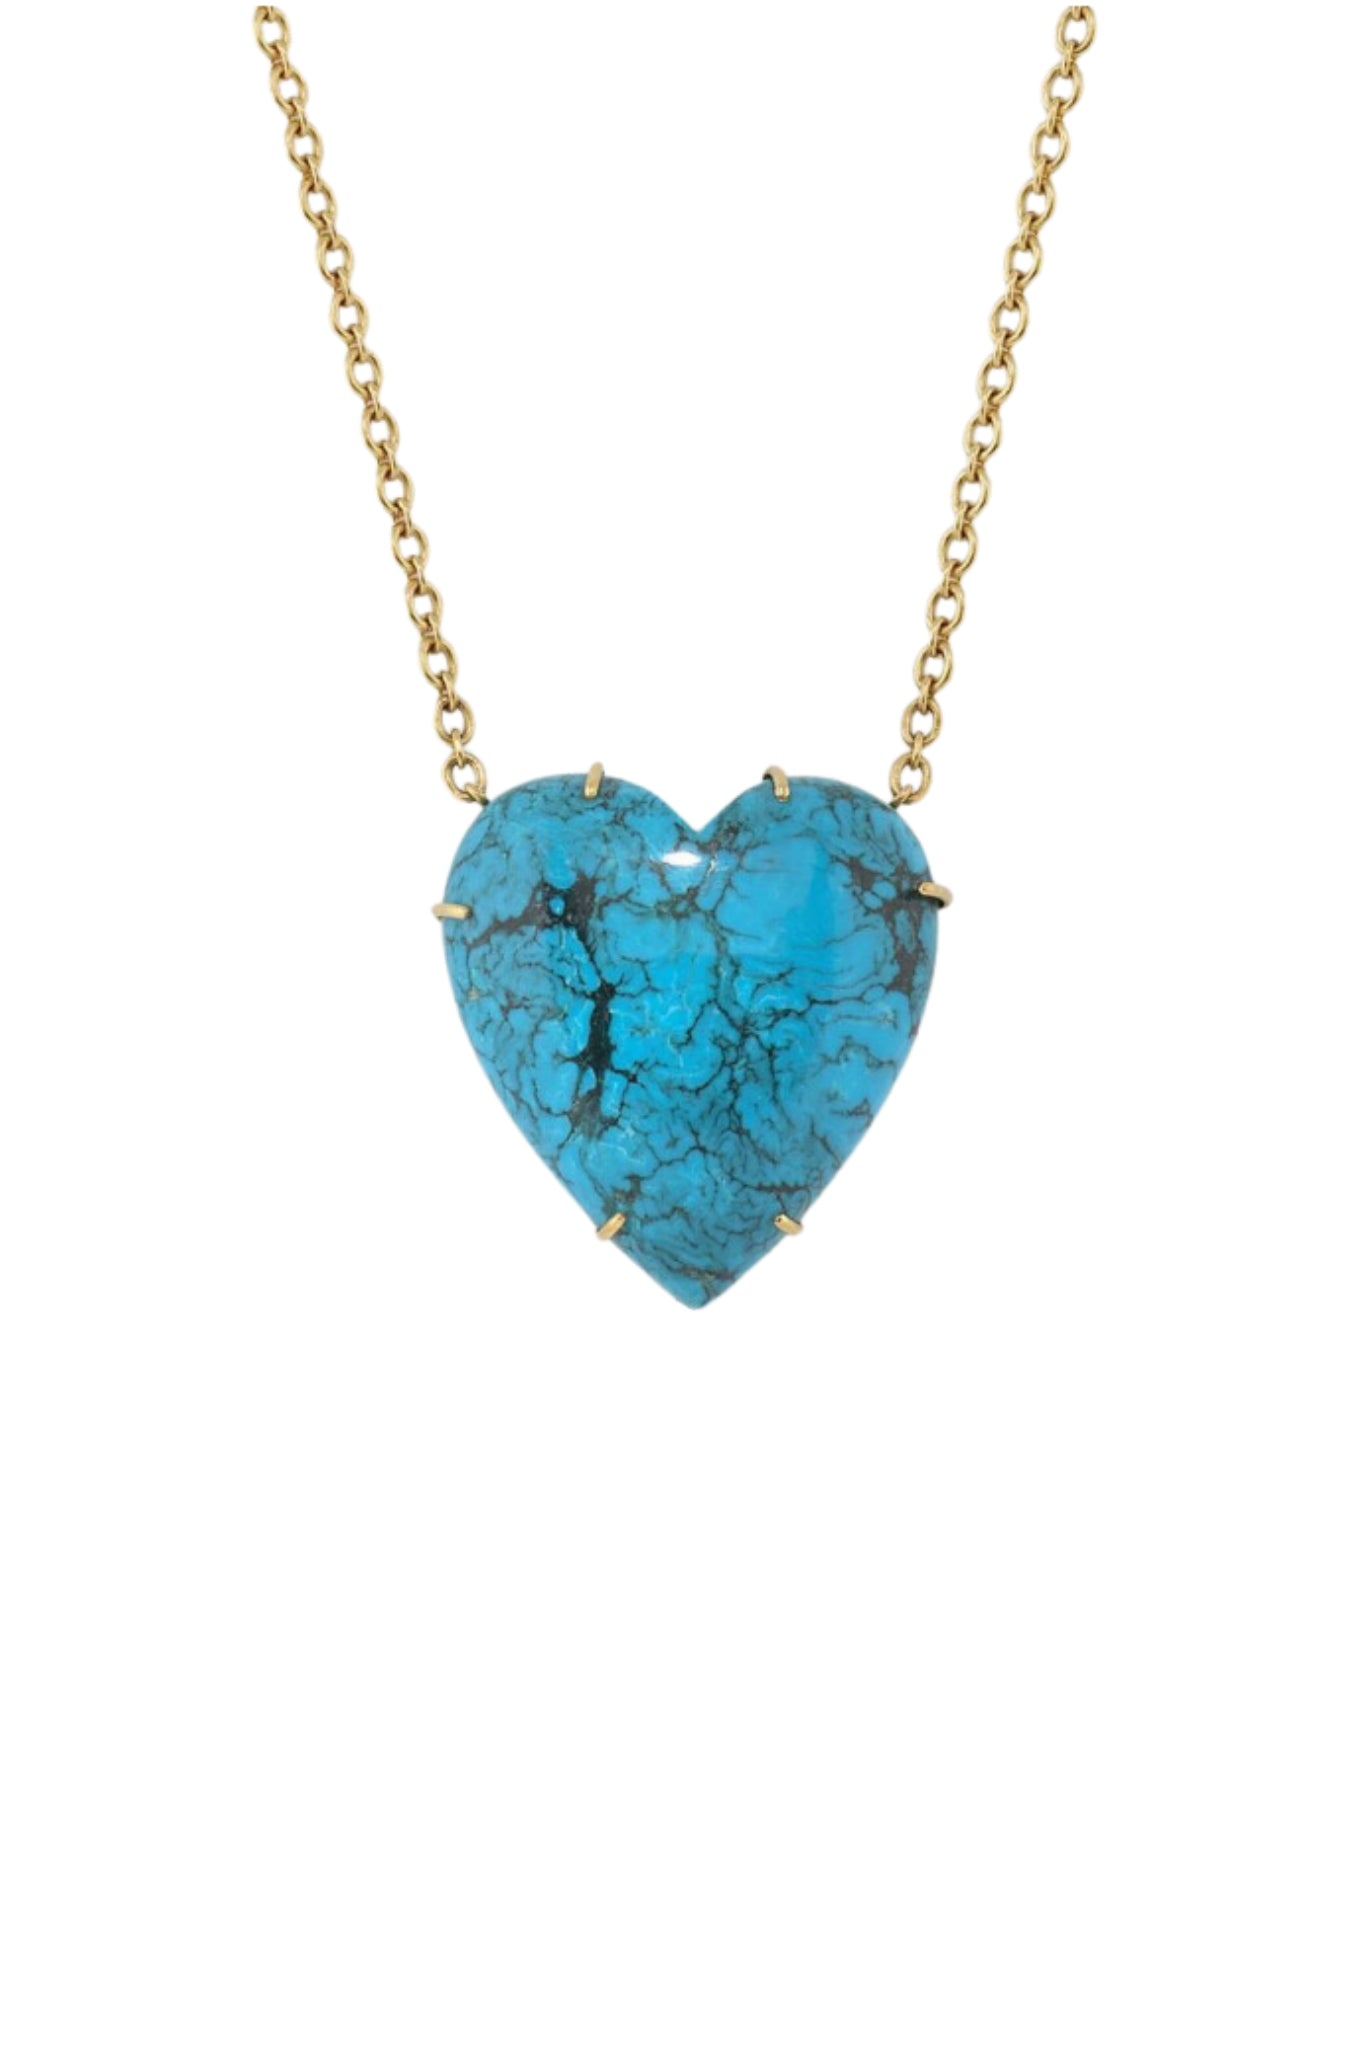 Irene Neuwirth Love One of a Kind 17" Heart Carved Turquoise and 18k Yellow Gold